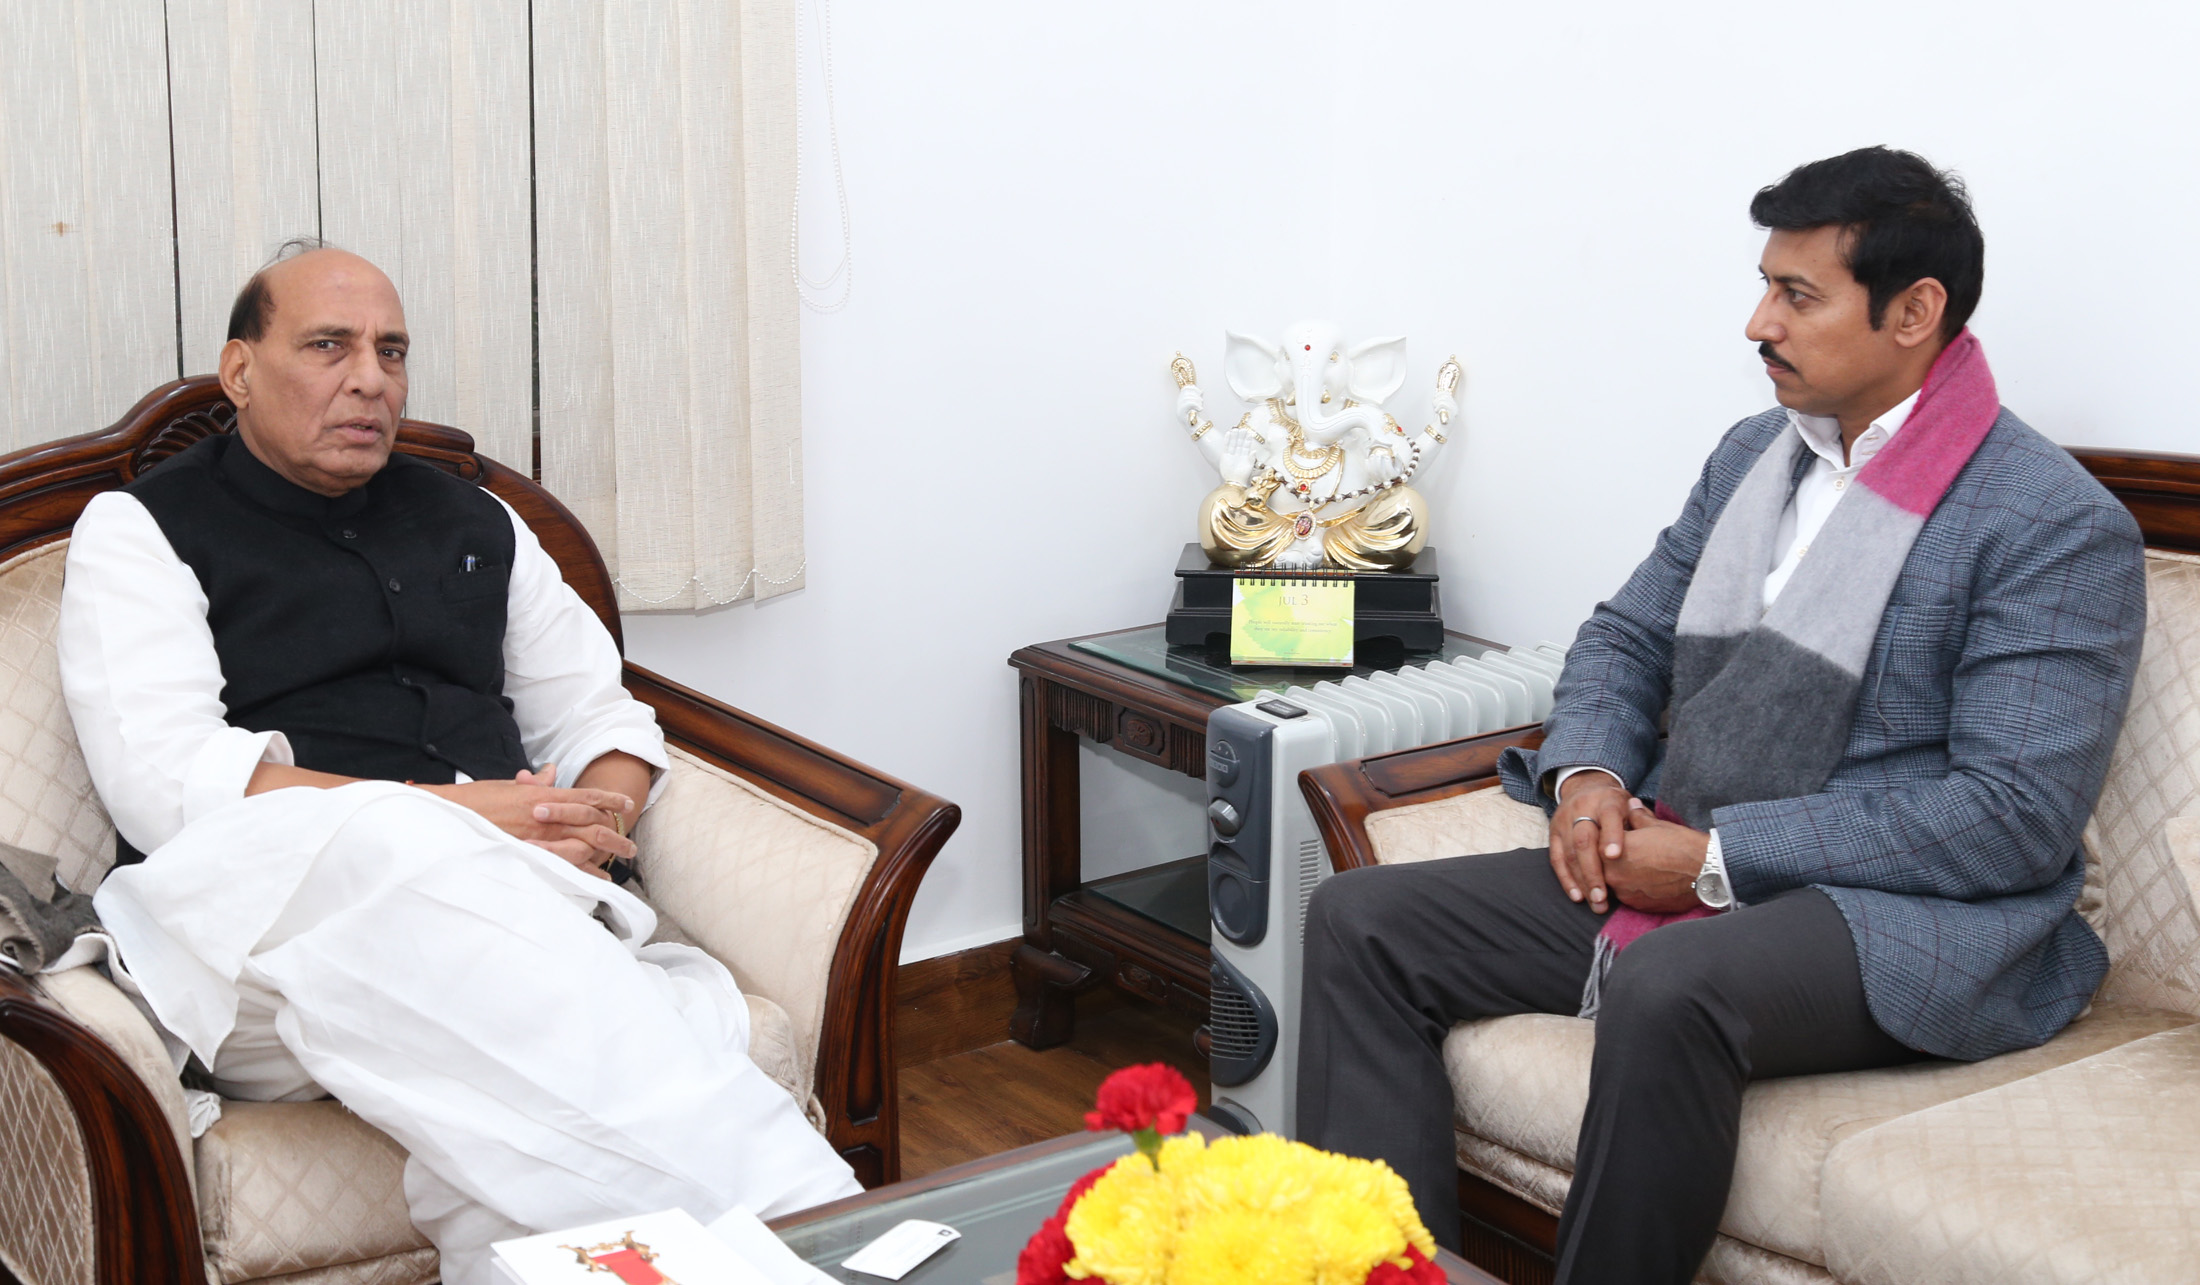 The Minister of State for Information & Broadcasting, Col. Rajyavardhan Singh Rathore calling on the Union Home Minister, Shri Rajnath Singh, in New Delhi on January 03, 2017.